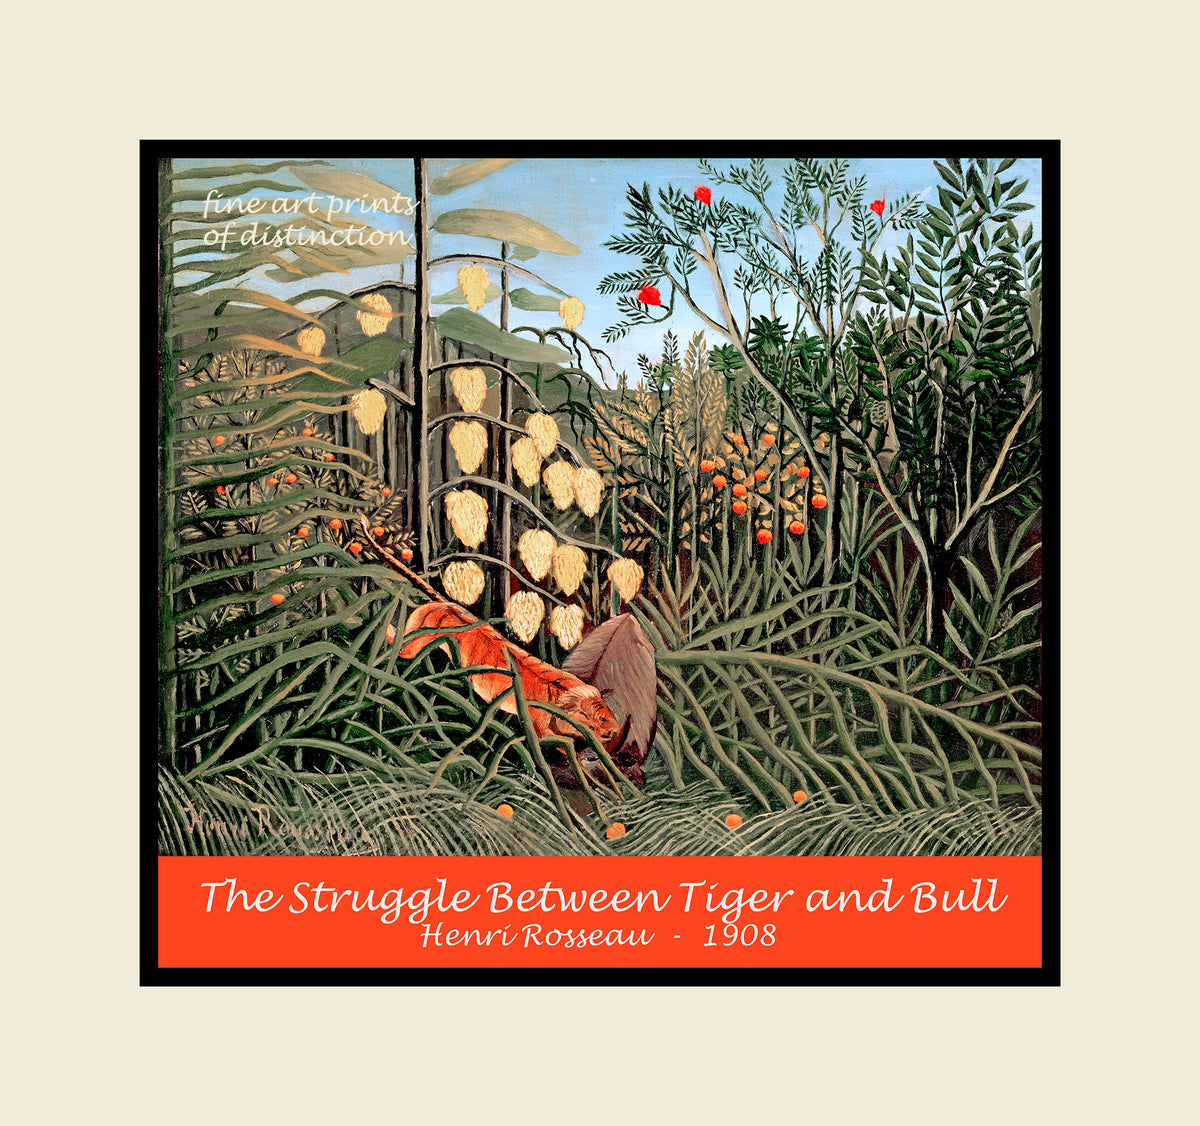 An archival premium Quality Poster of The Struggle Between Tiger and Bull painted by Henri Rousseau in 1908 - 1909 for sale by Brandywine General Store